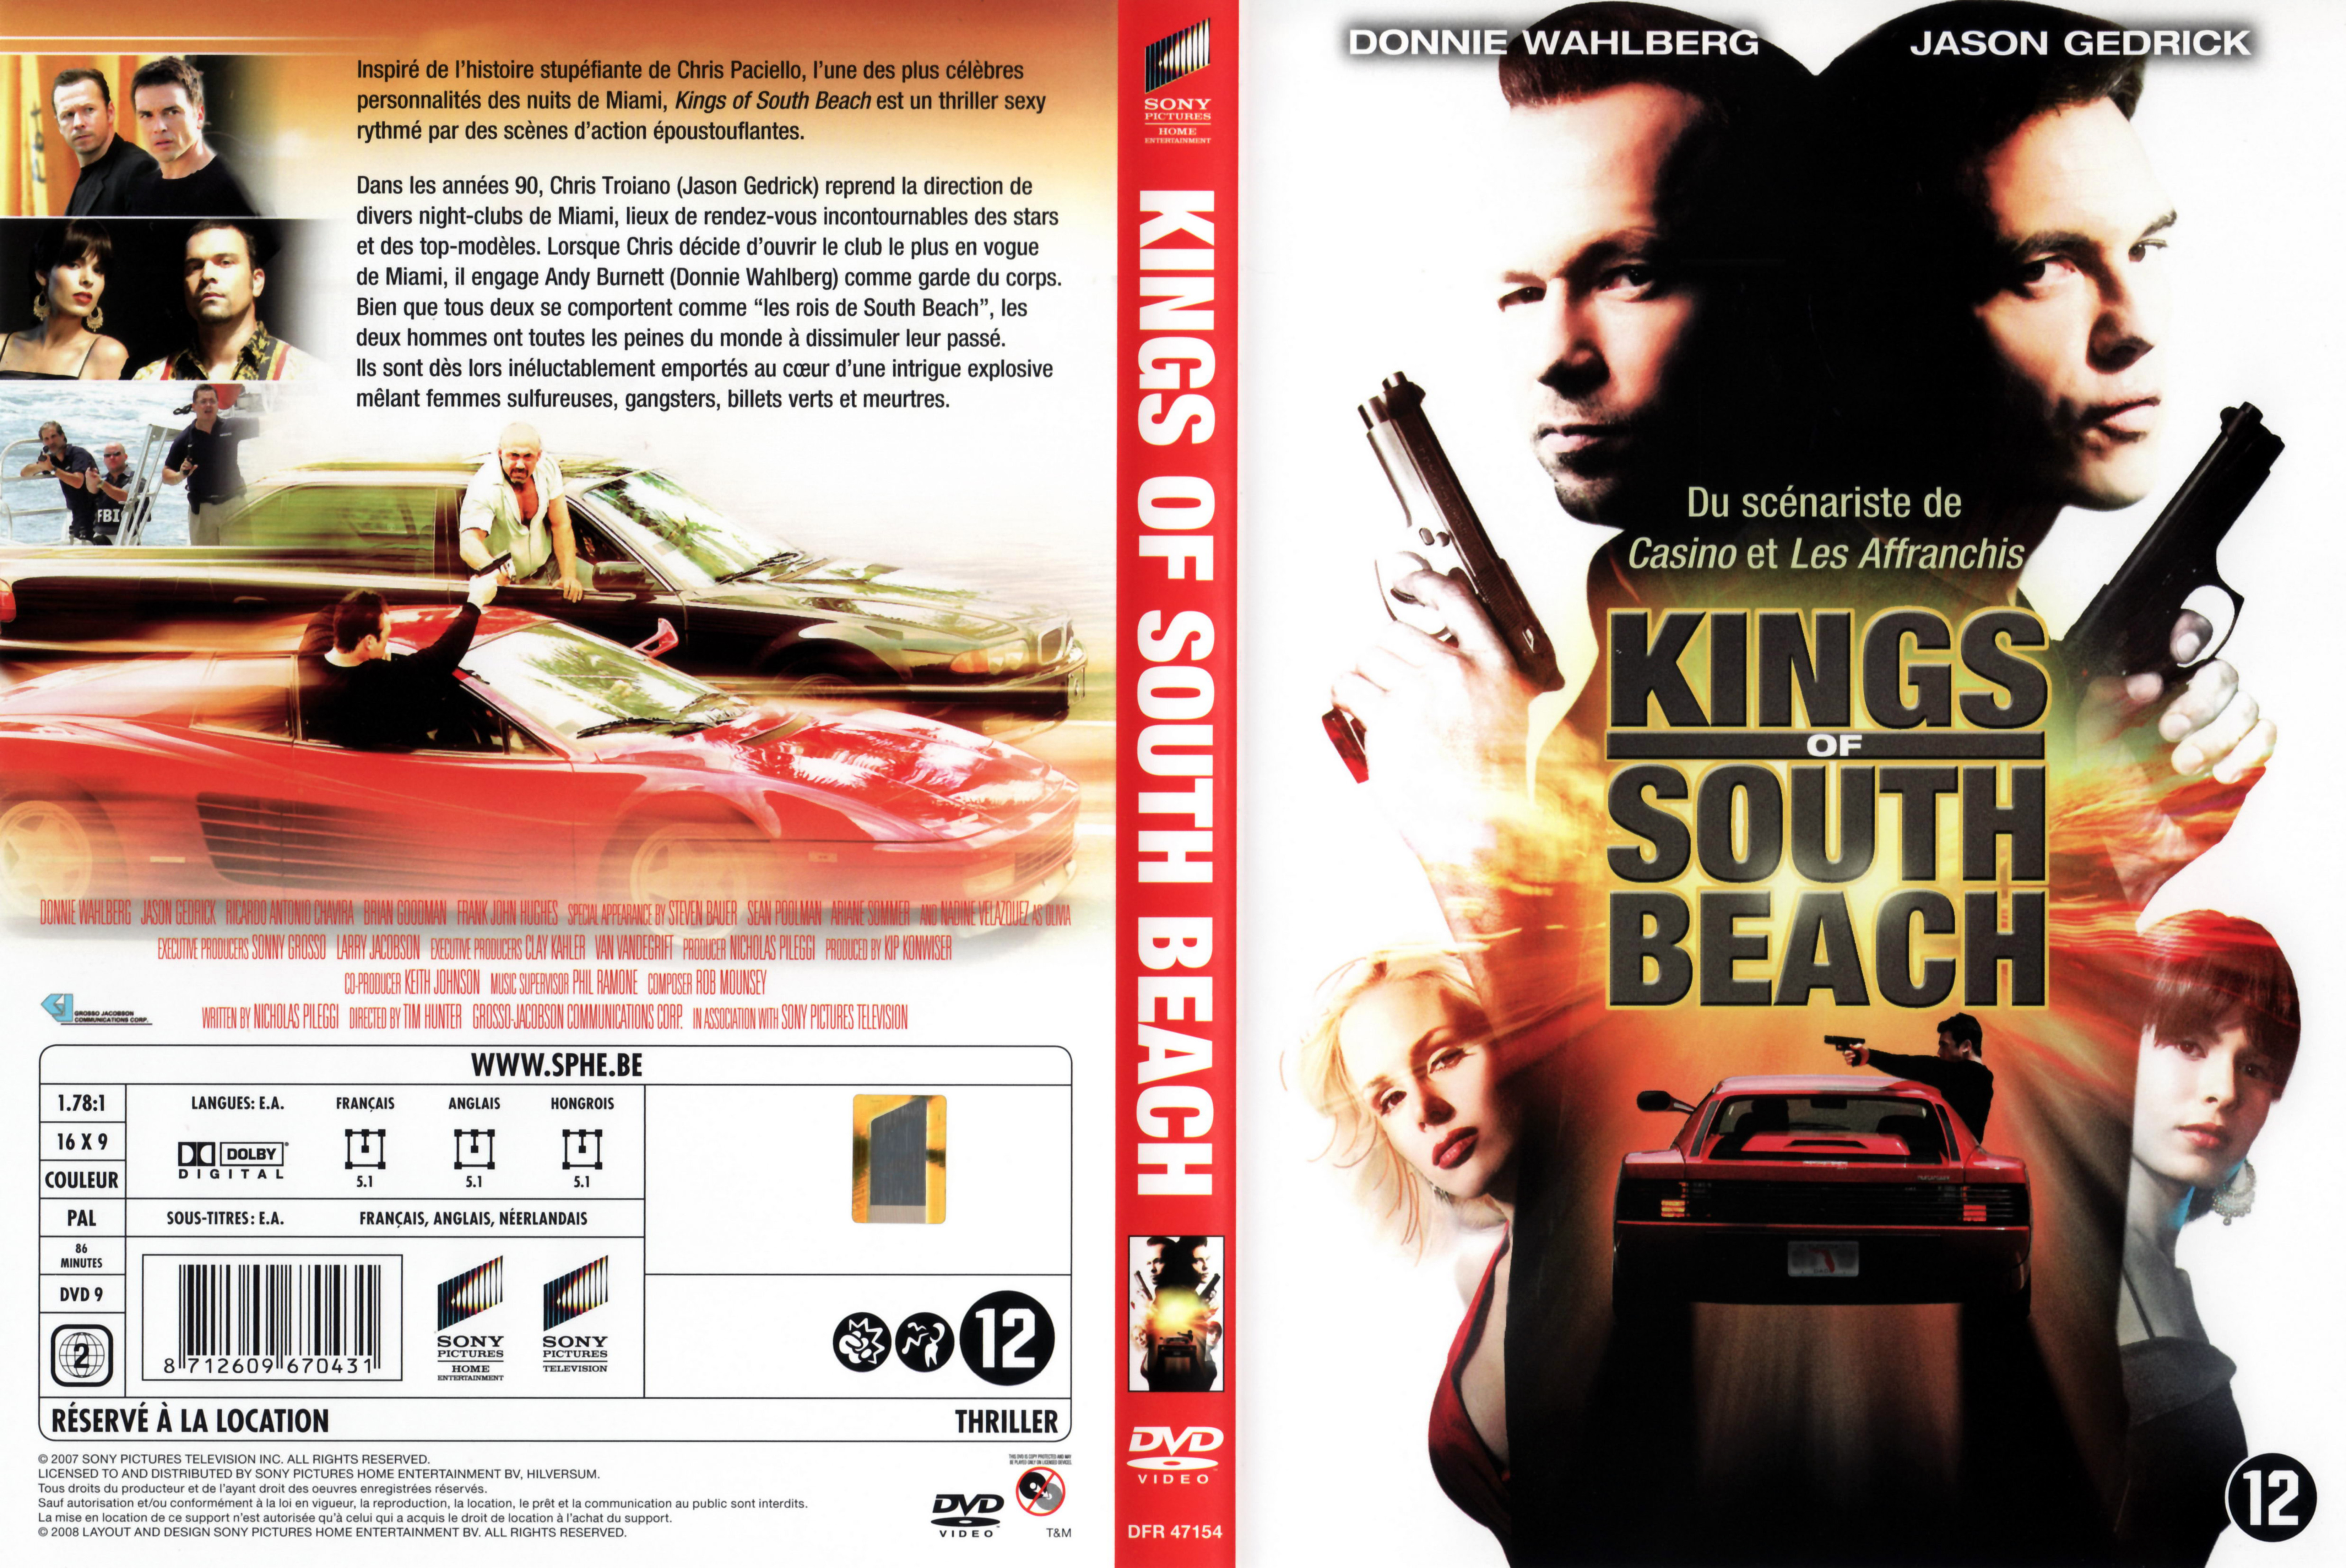 Jaquette DVD Kings of South Beach